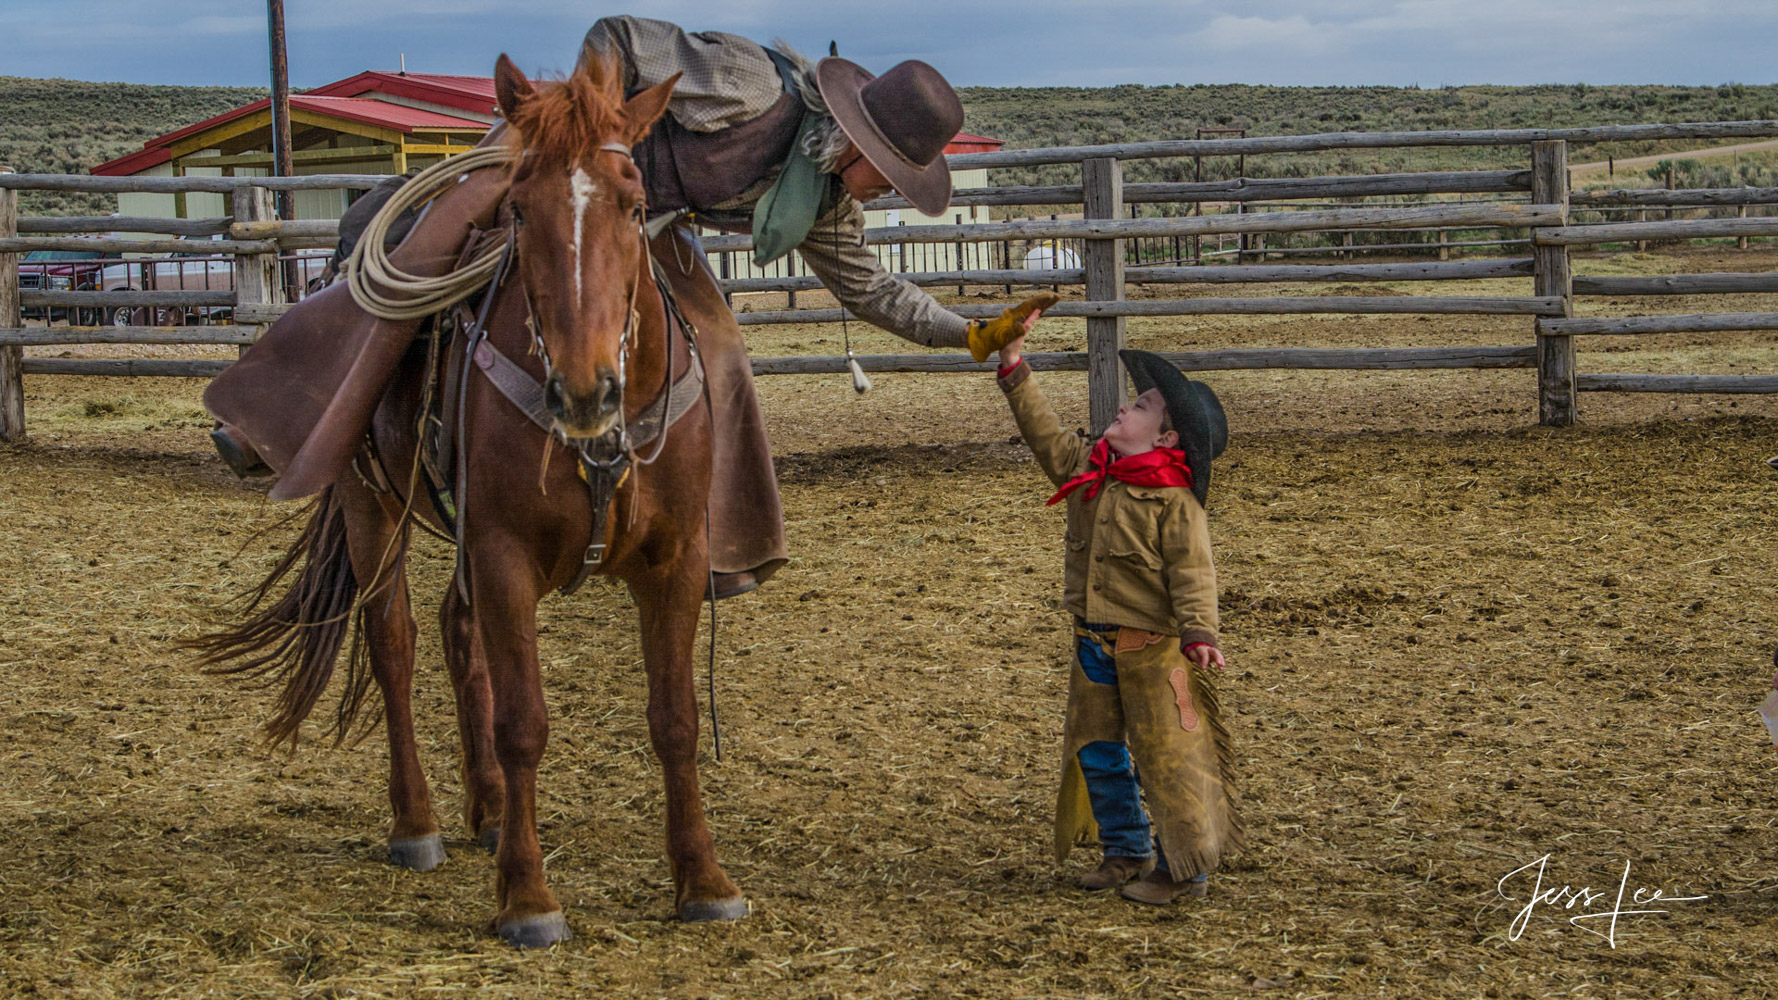 Cowboy High Five Cowboy Photography, Stock, Fine Art, Limited Edition, Cowboy, and Western exclusive high-resolution Museum Quality...